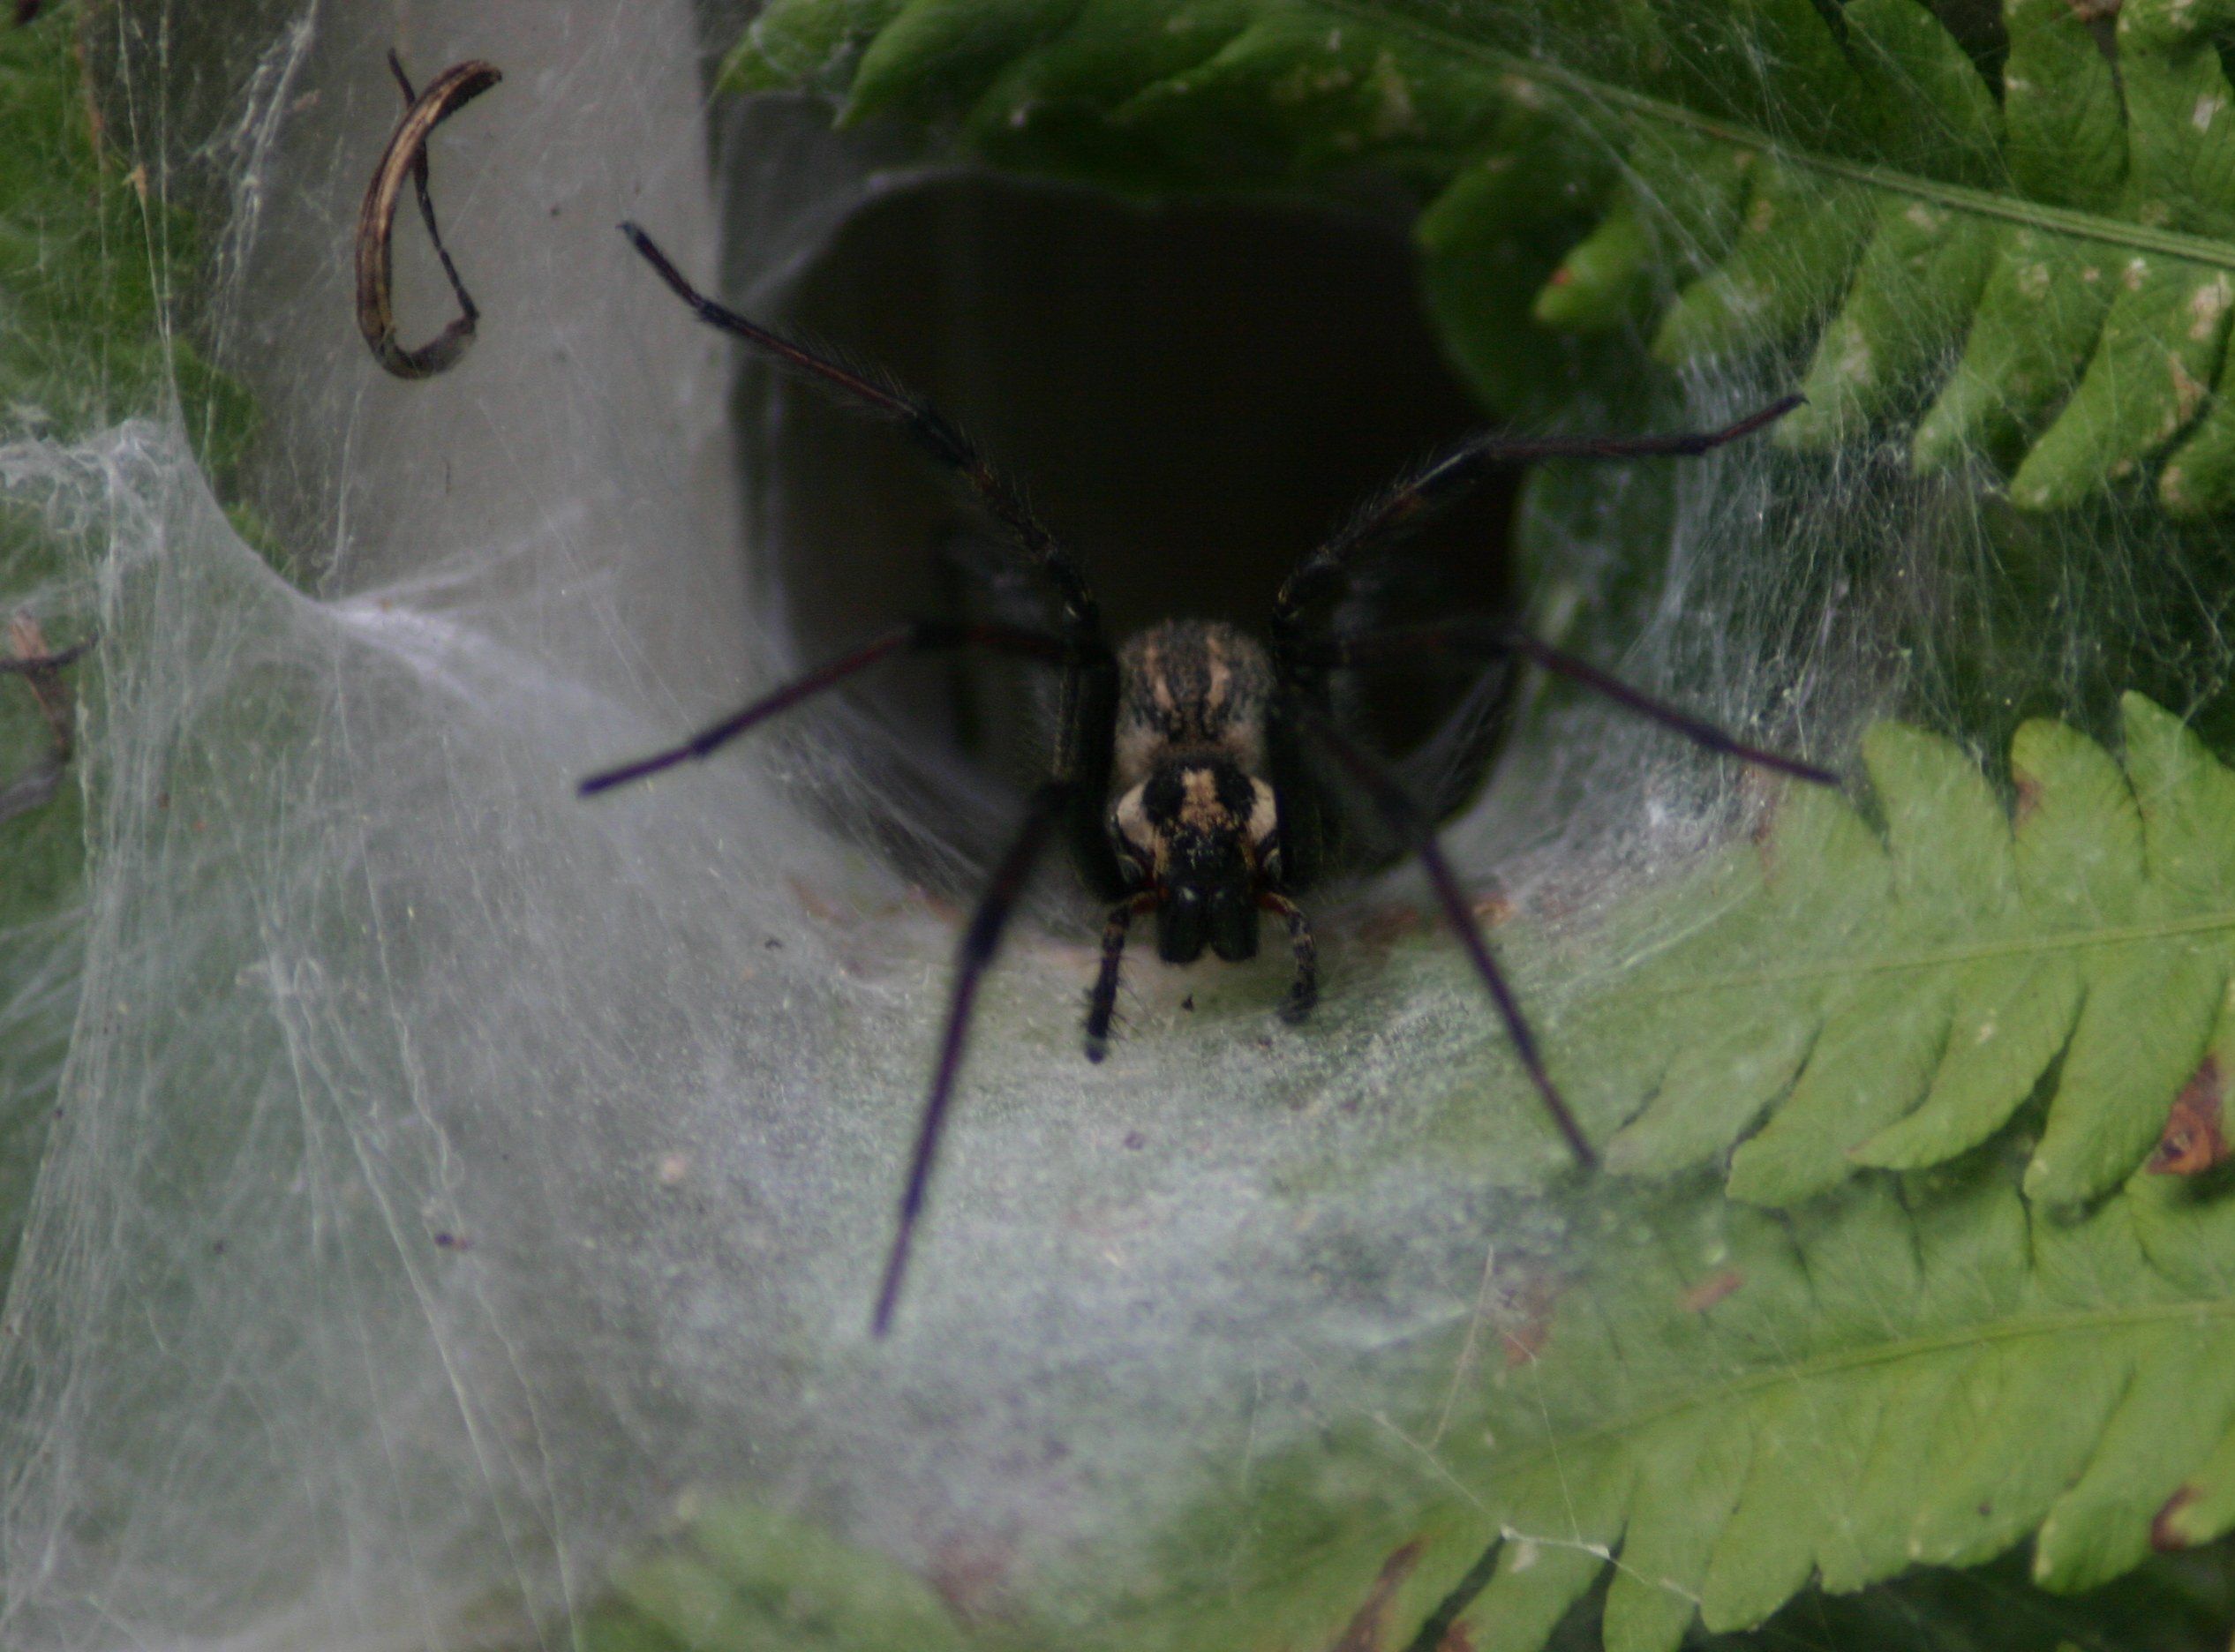 A funnel spider in its web.